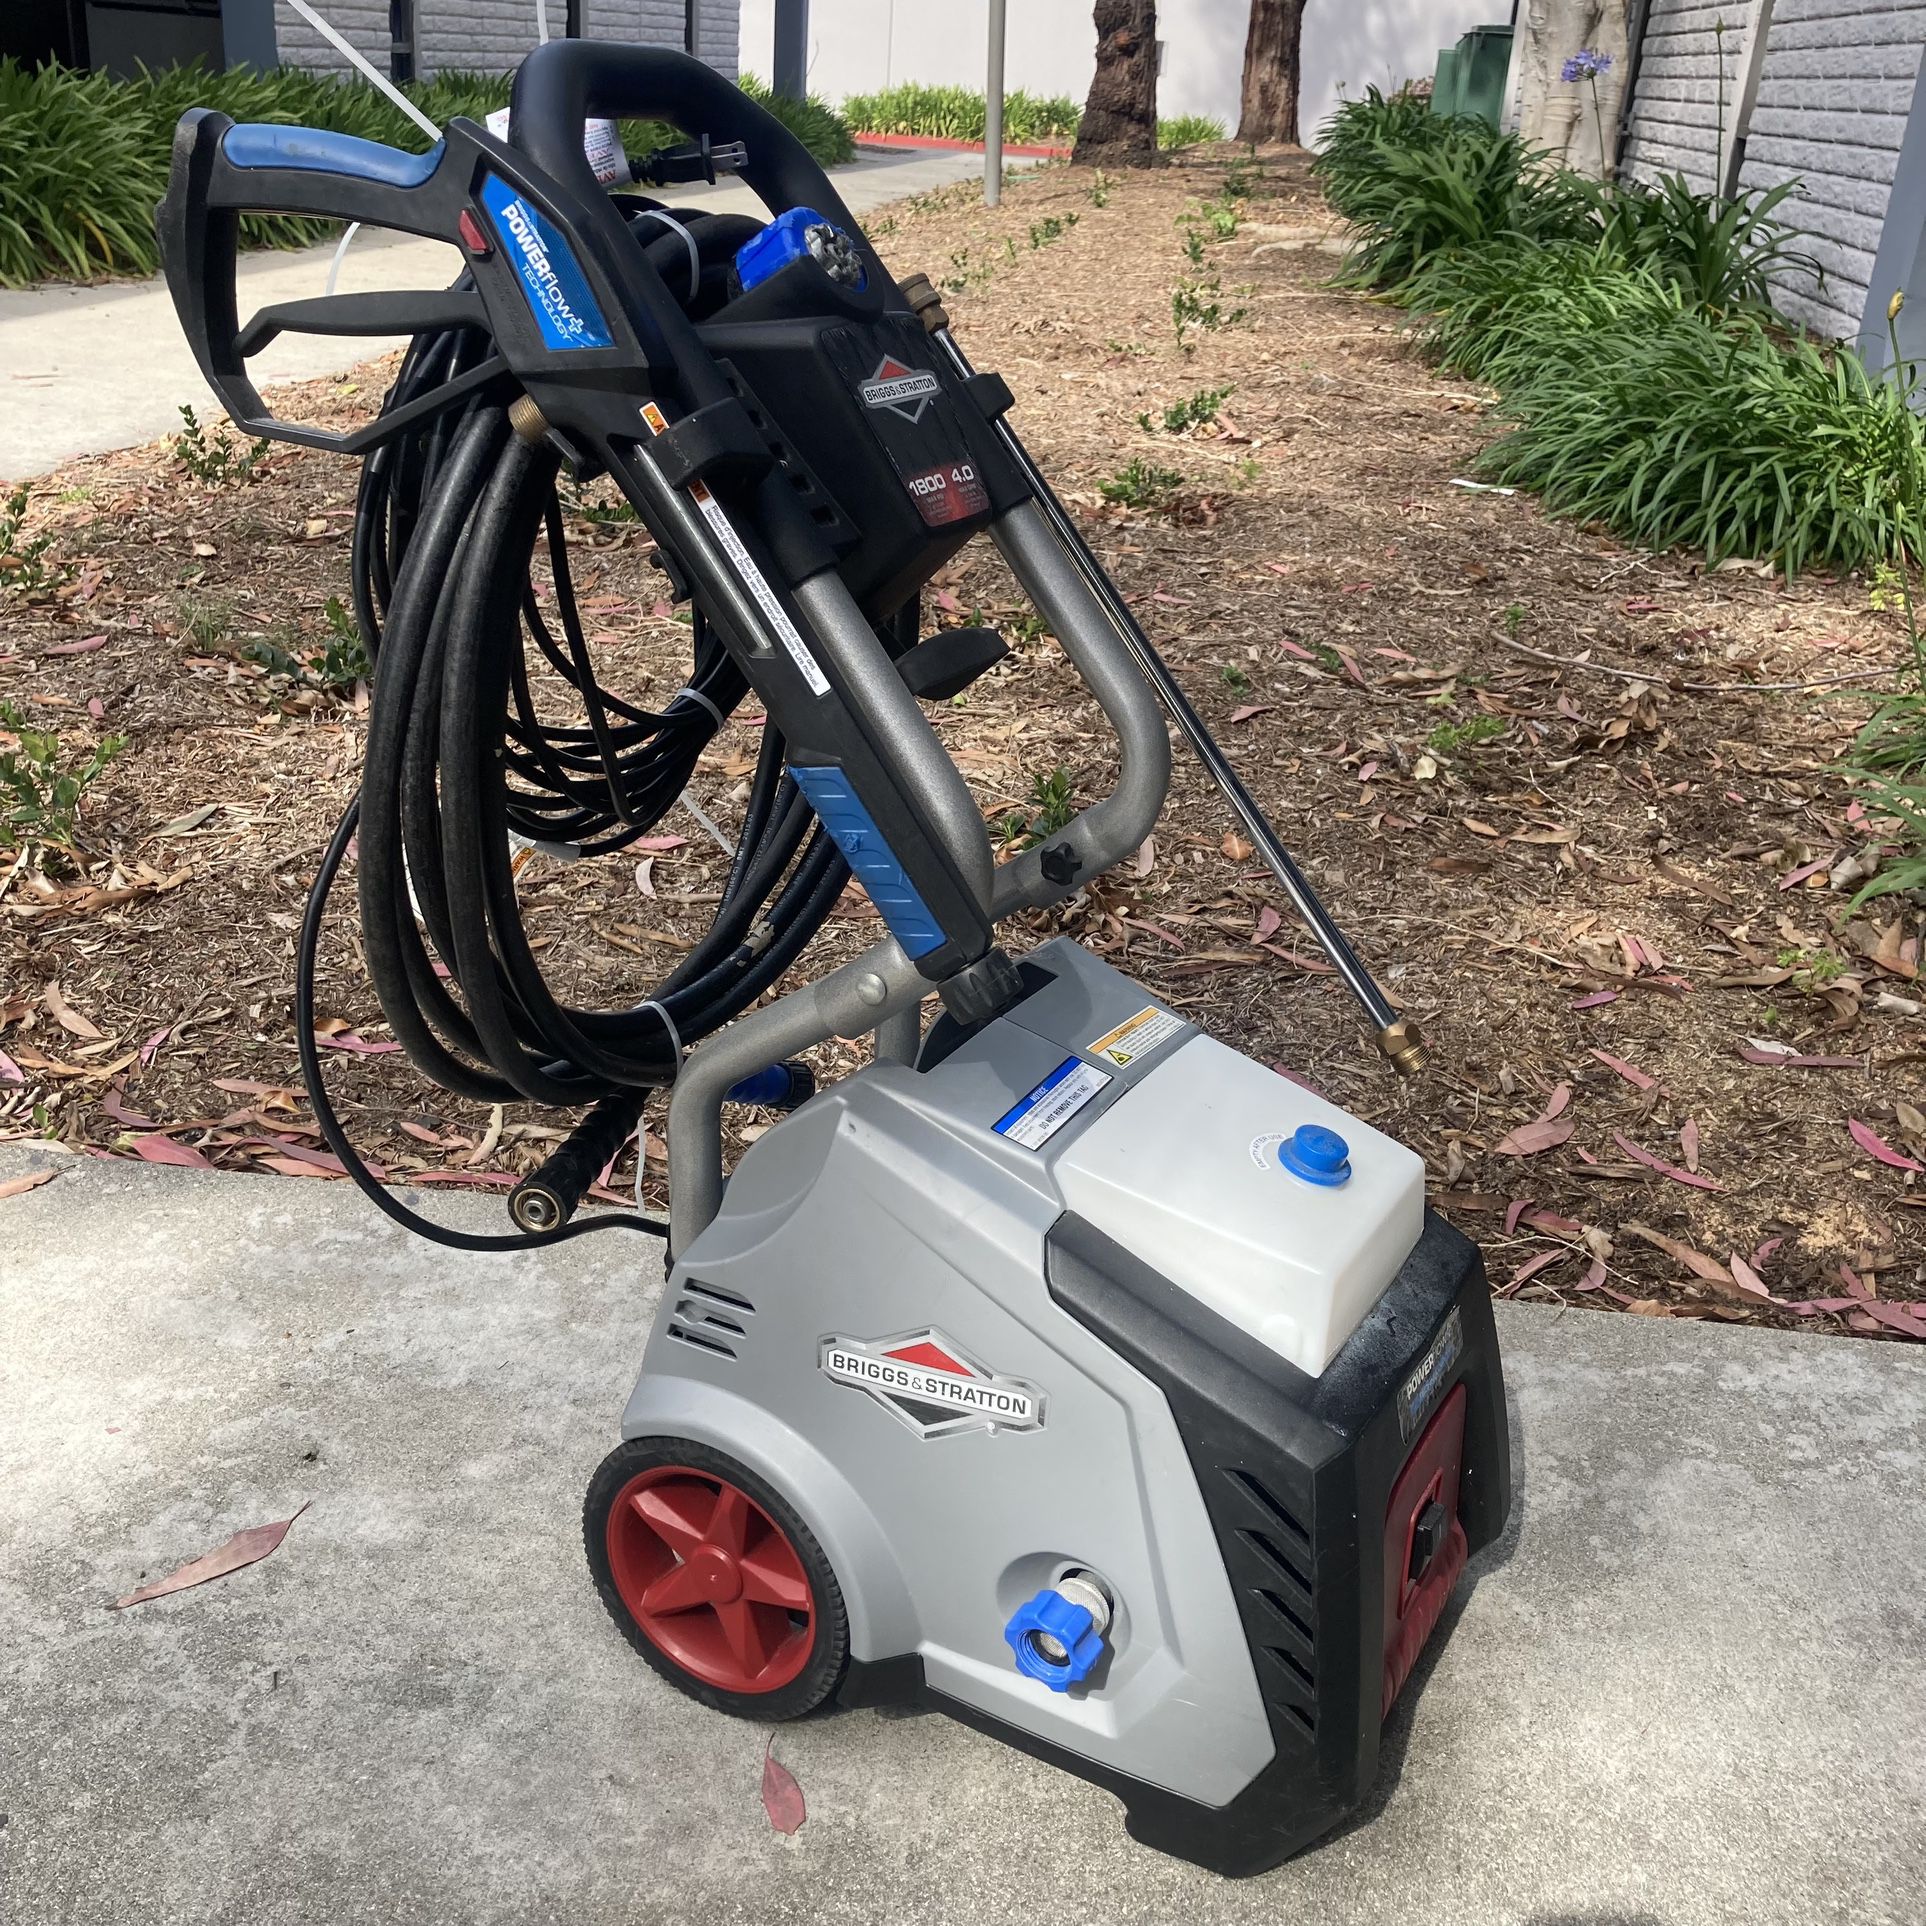 Briggs & Stratton 1800 PSI Pressure Washer With Detergent Tank And 26’ Of Hose.